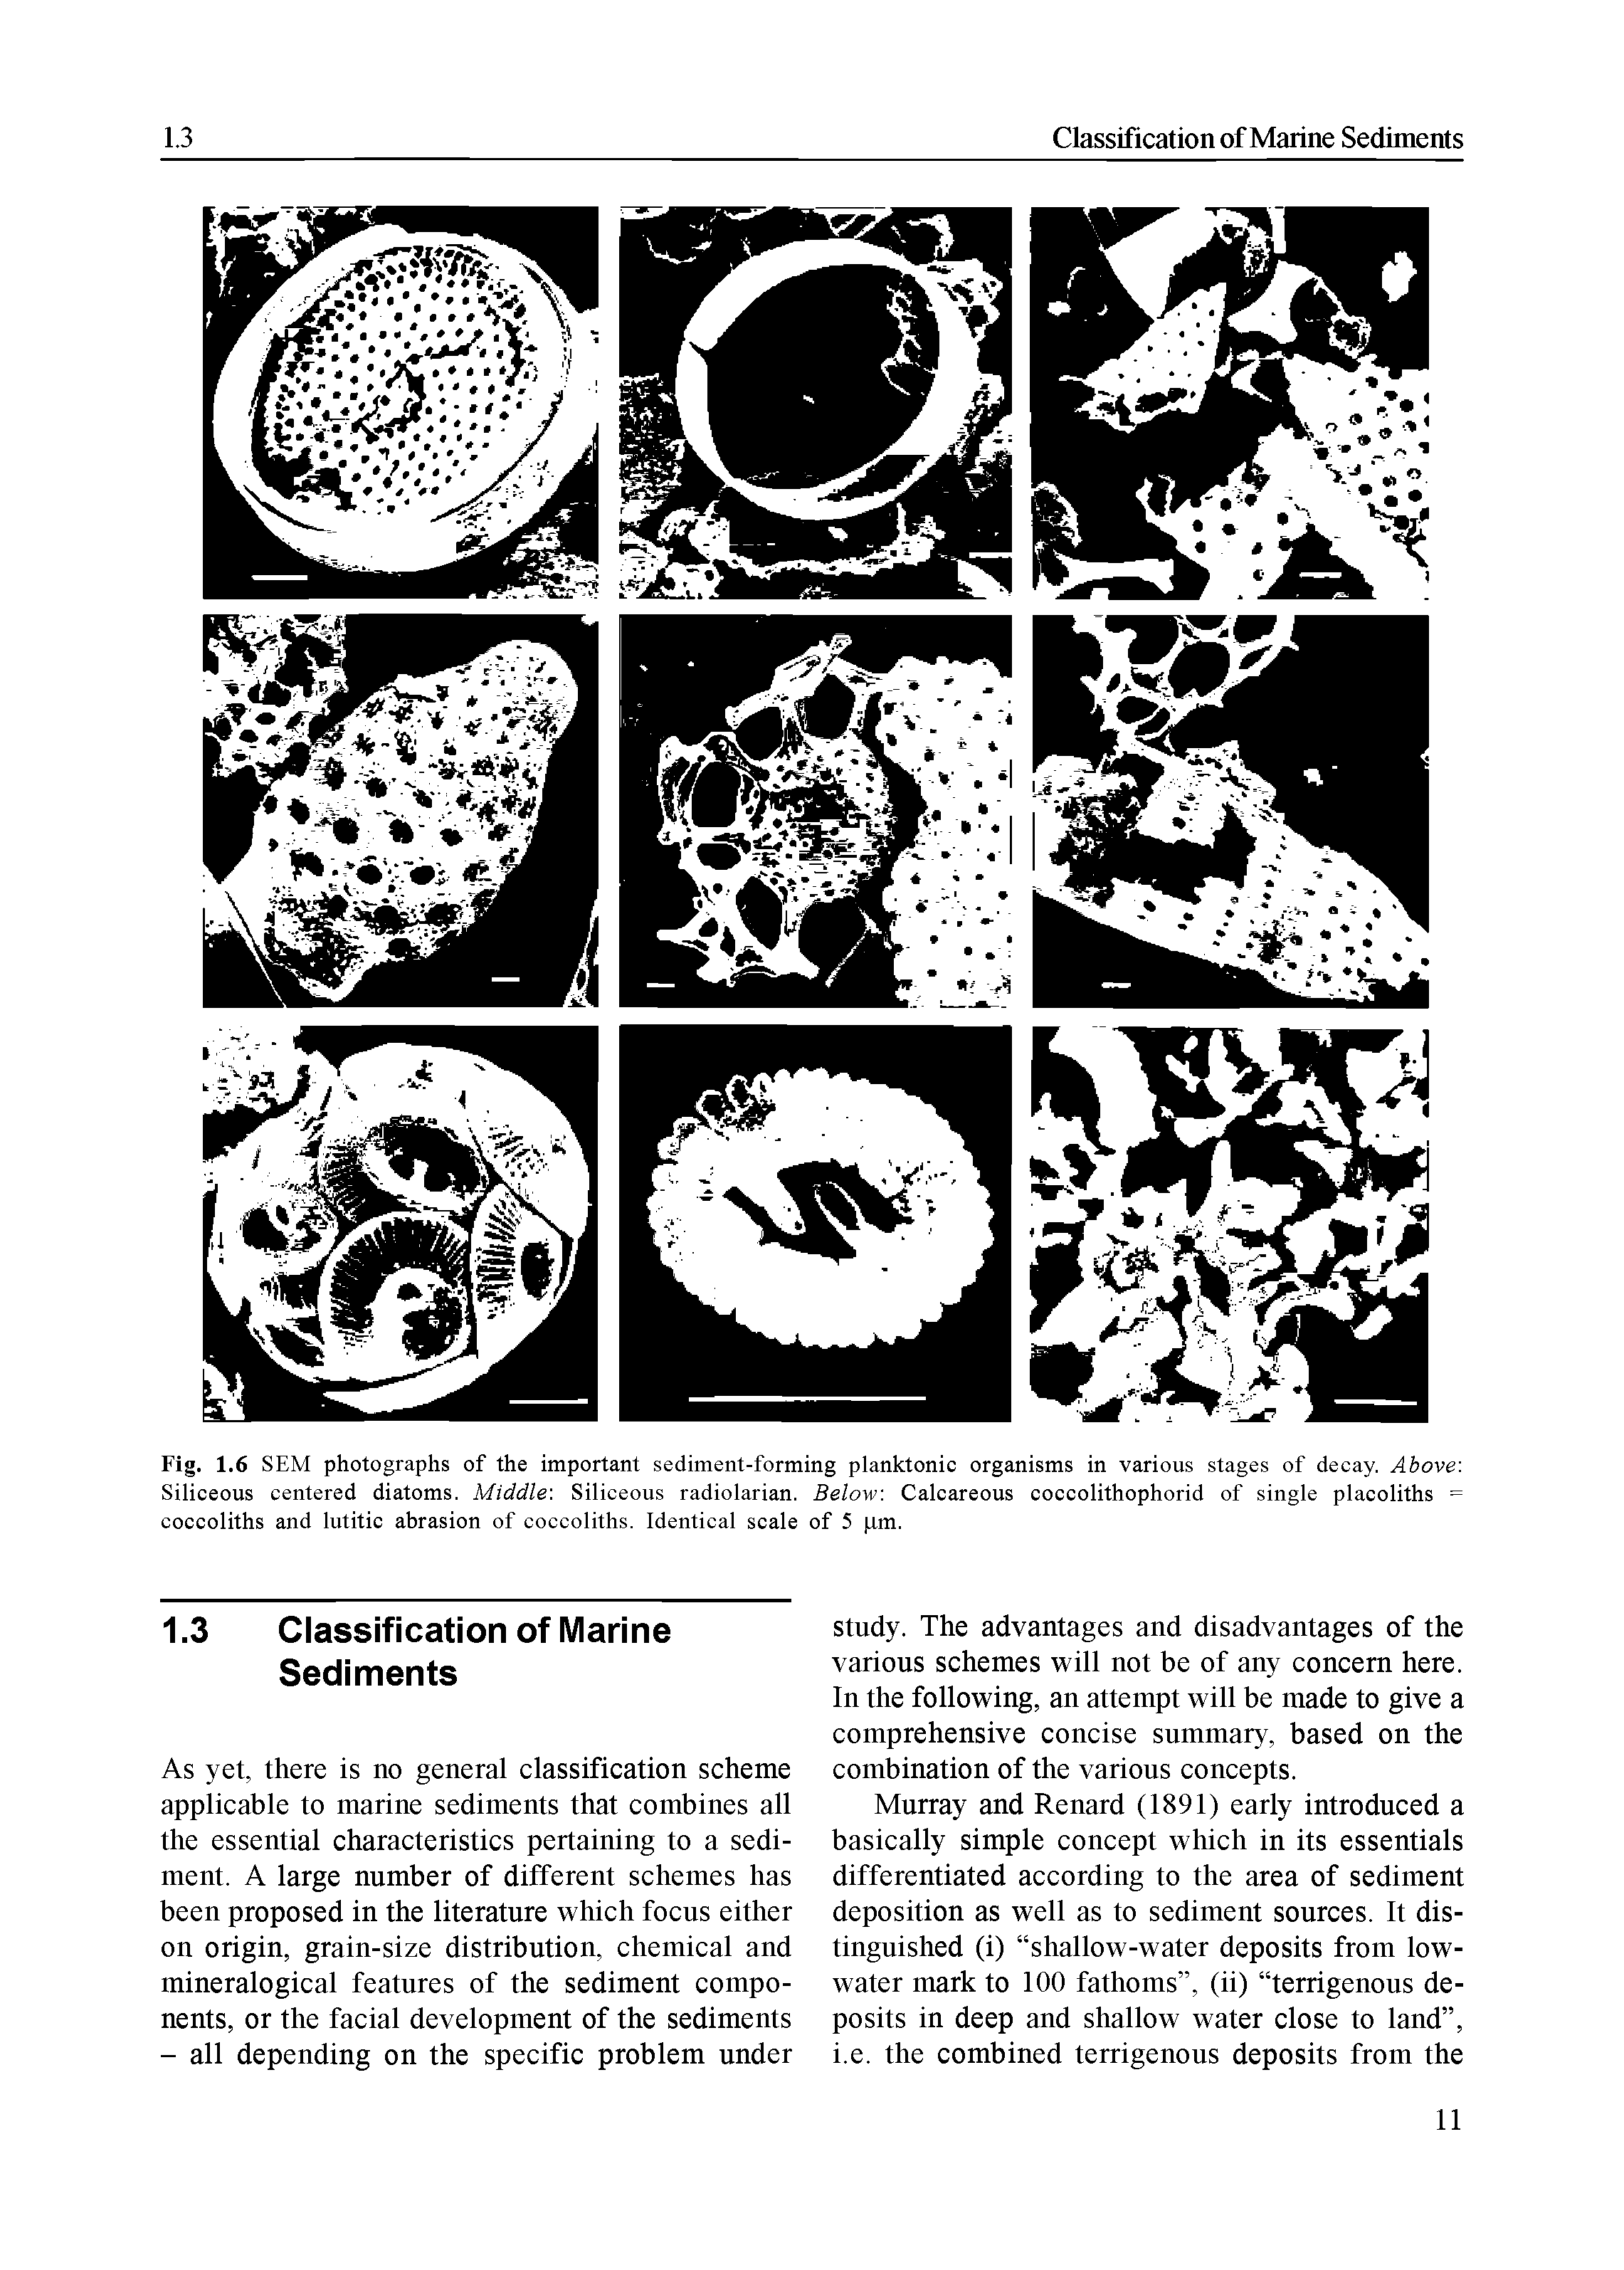 Fig. 1.6 SEM photographs of the important sediment-forming planktonic organisms in various stages of decay. Above. Siliceous centered diatoms. Middle. Siliceous radiolarian. Below. Calcareous coccolithophorid of single placoliths = coccoliths and lutitic abrasion of coccoliths. Identical scale of 5 pm.